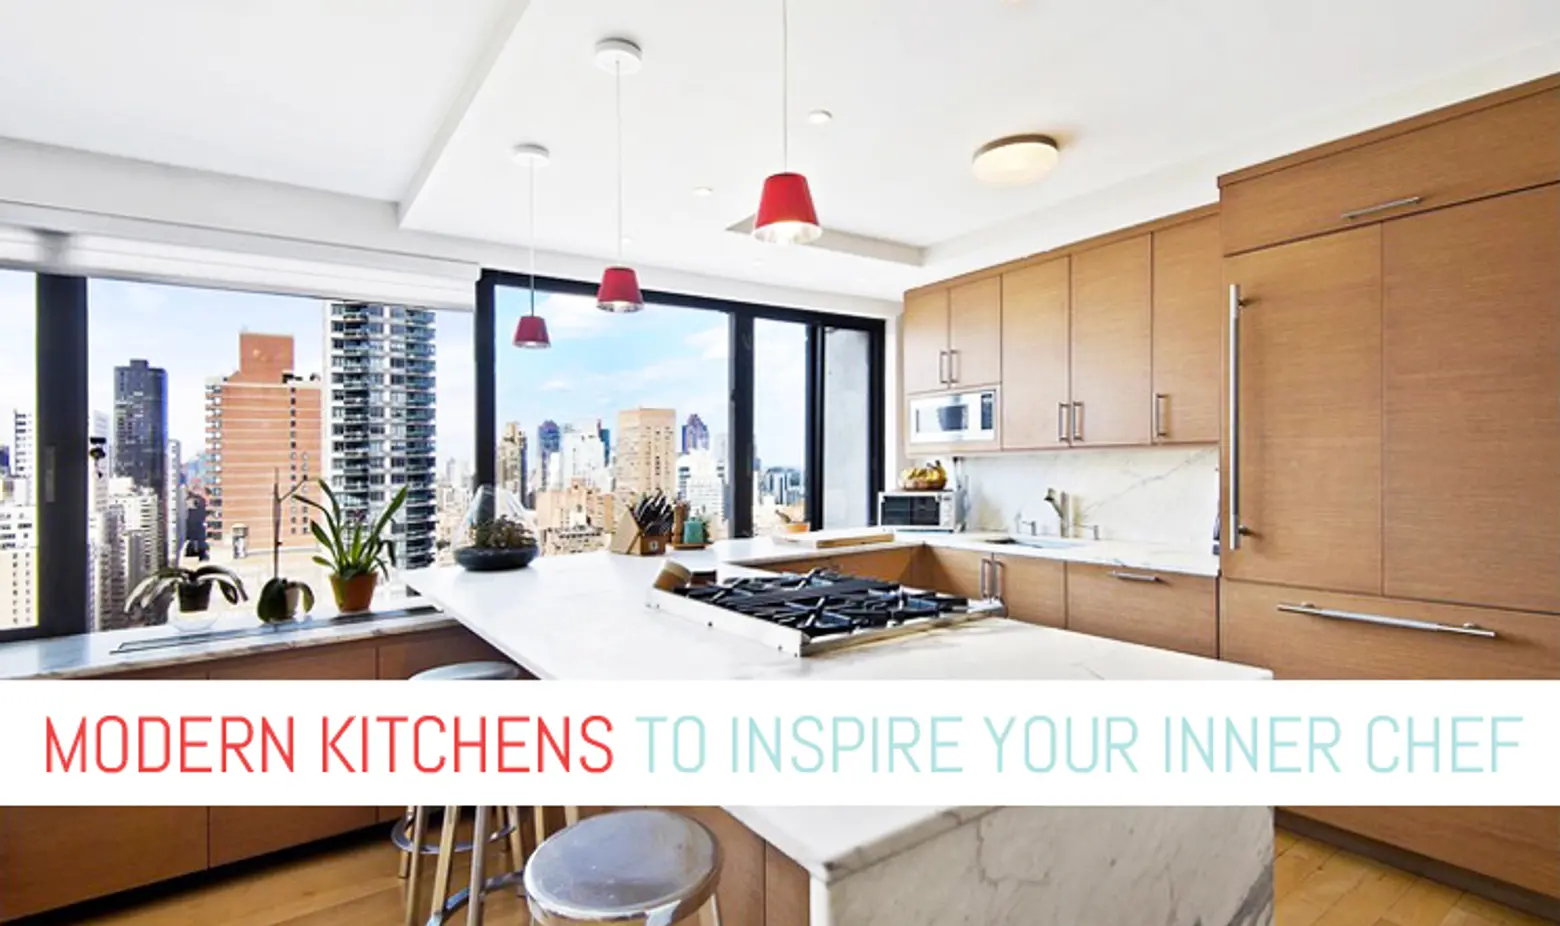 Five Modern Kitchens to Inspire Your Inner Chef